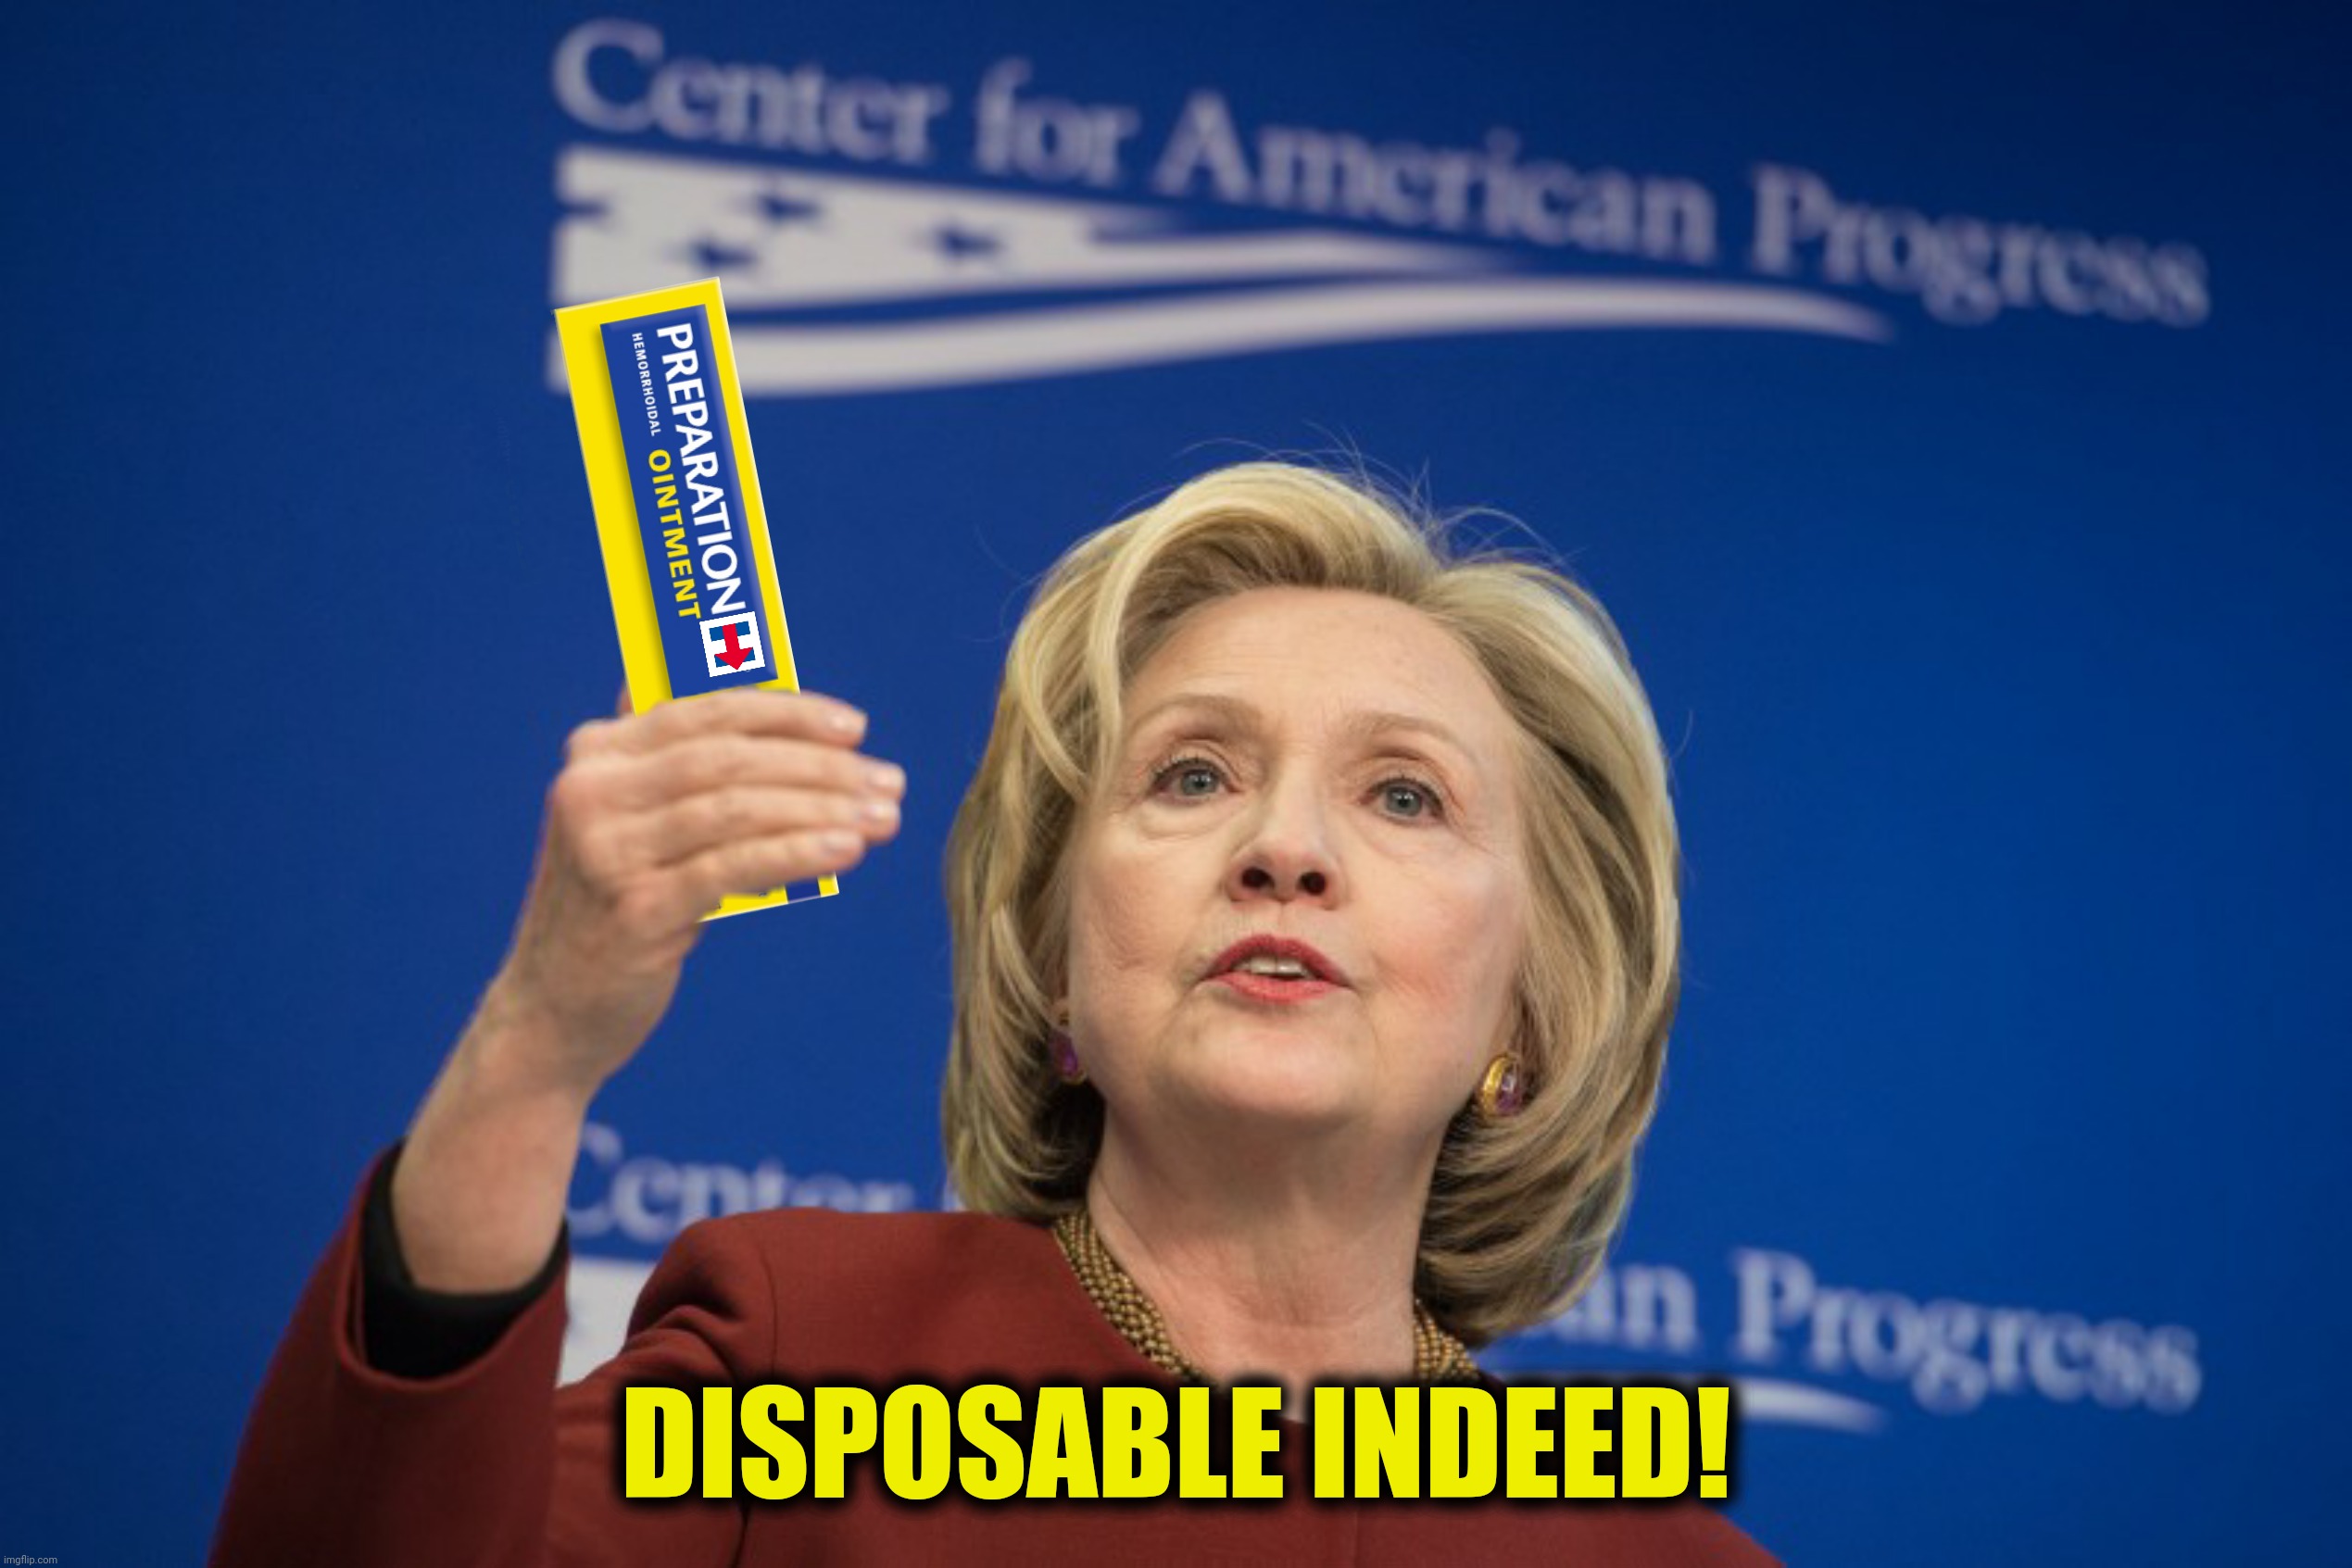 DISPOSABLE INDEED! | made w/ Imgflip meme maker